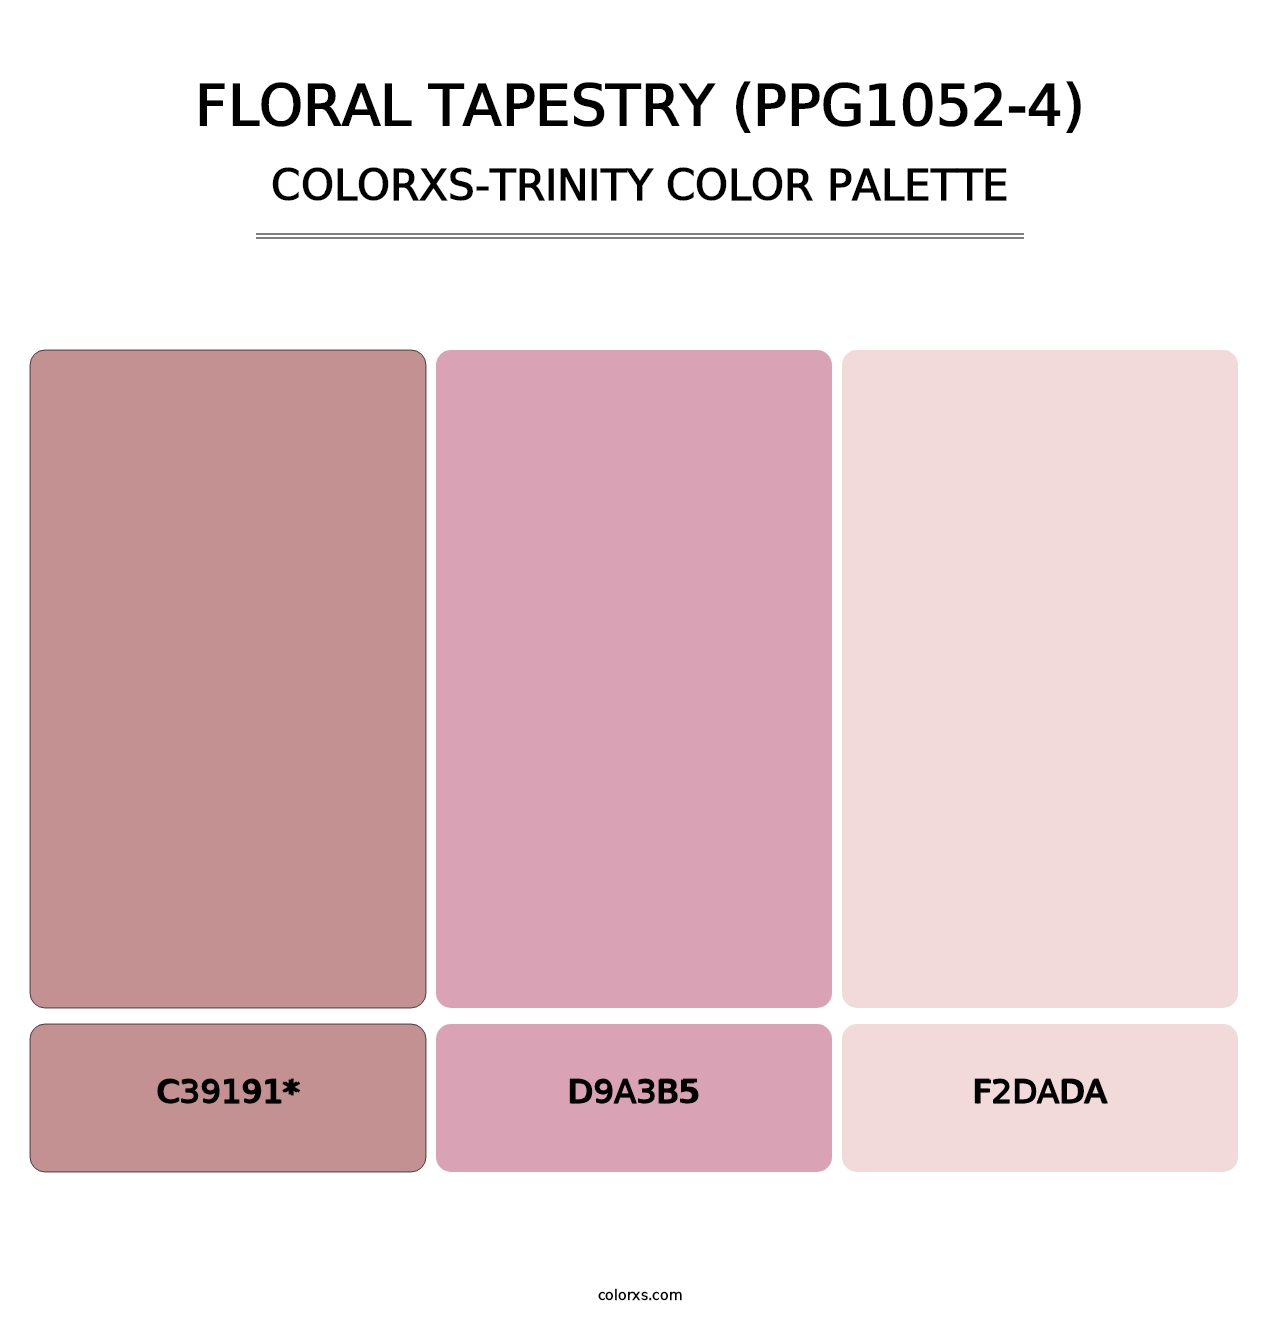 Floral Tapestry (PPG1052-4) - Colorxs Trinity Palette